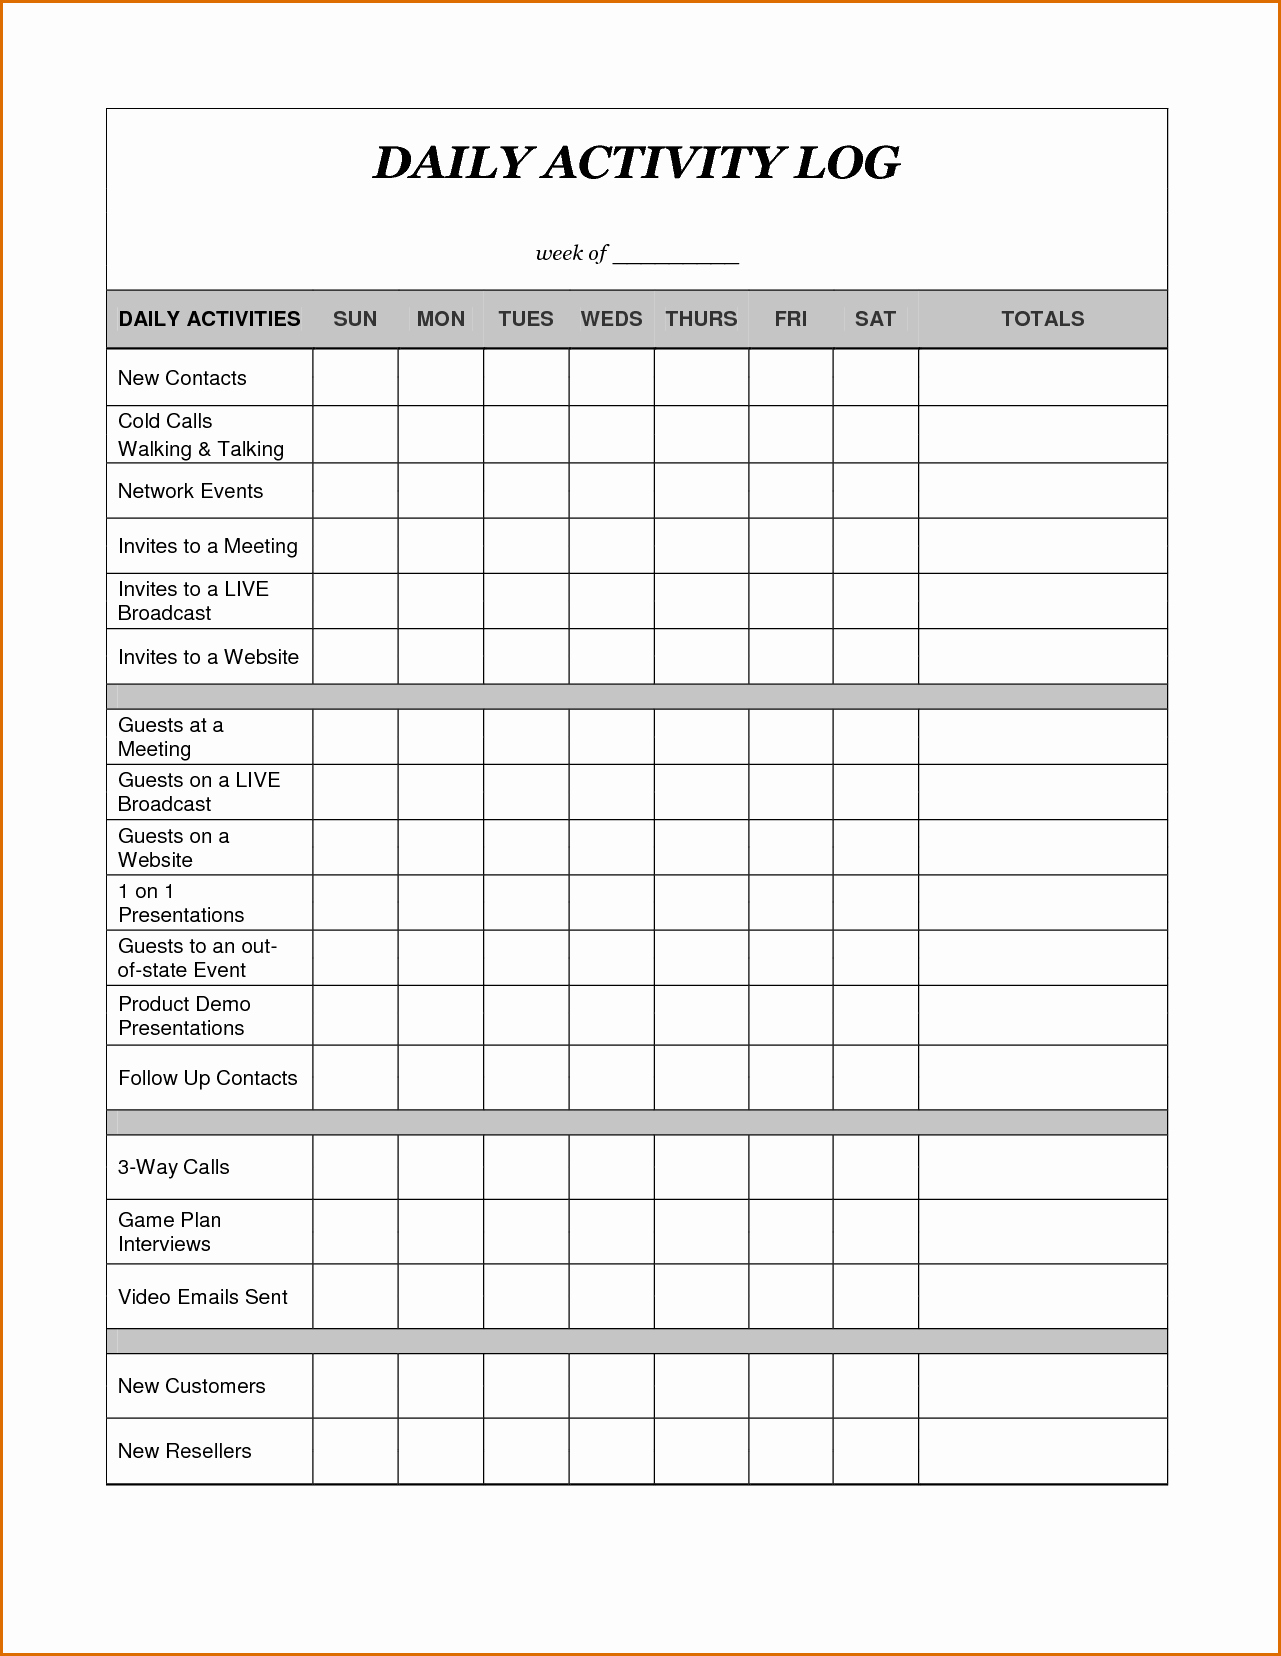 Daily Log Template Excel New 8 Daily Activity Log Template